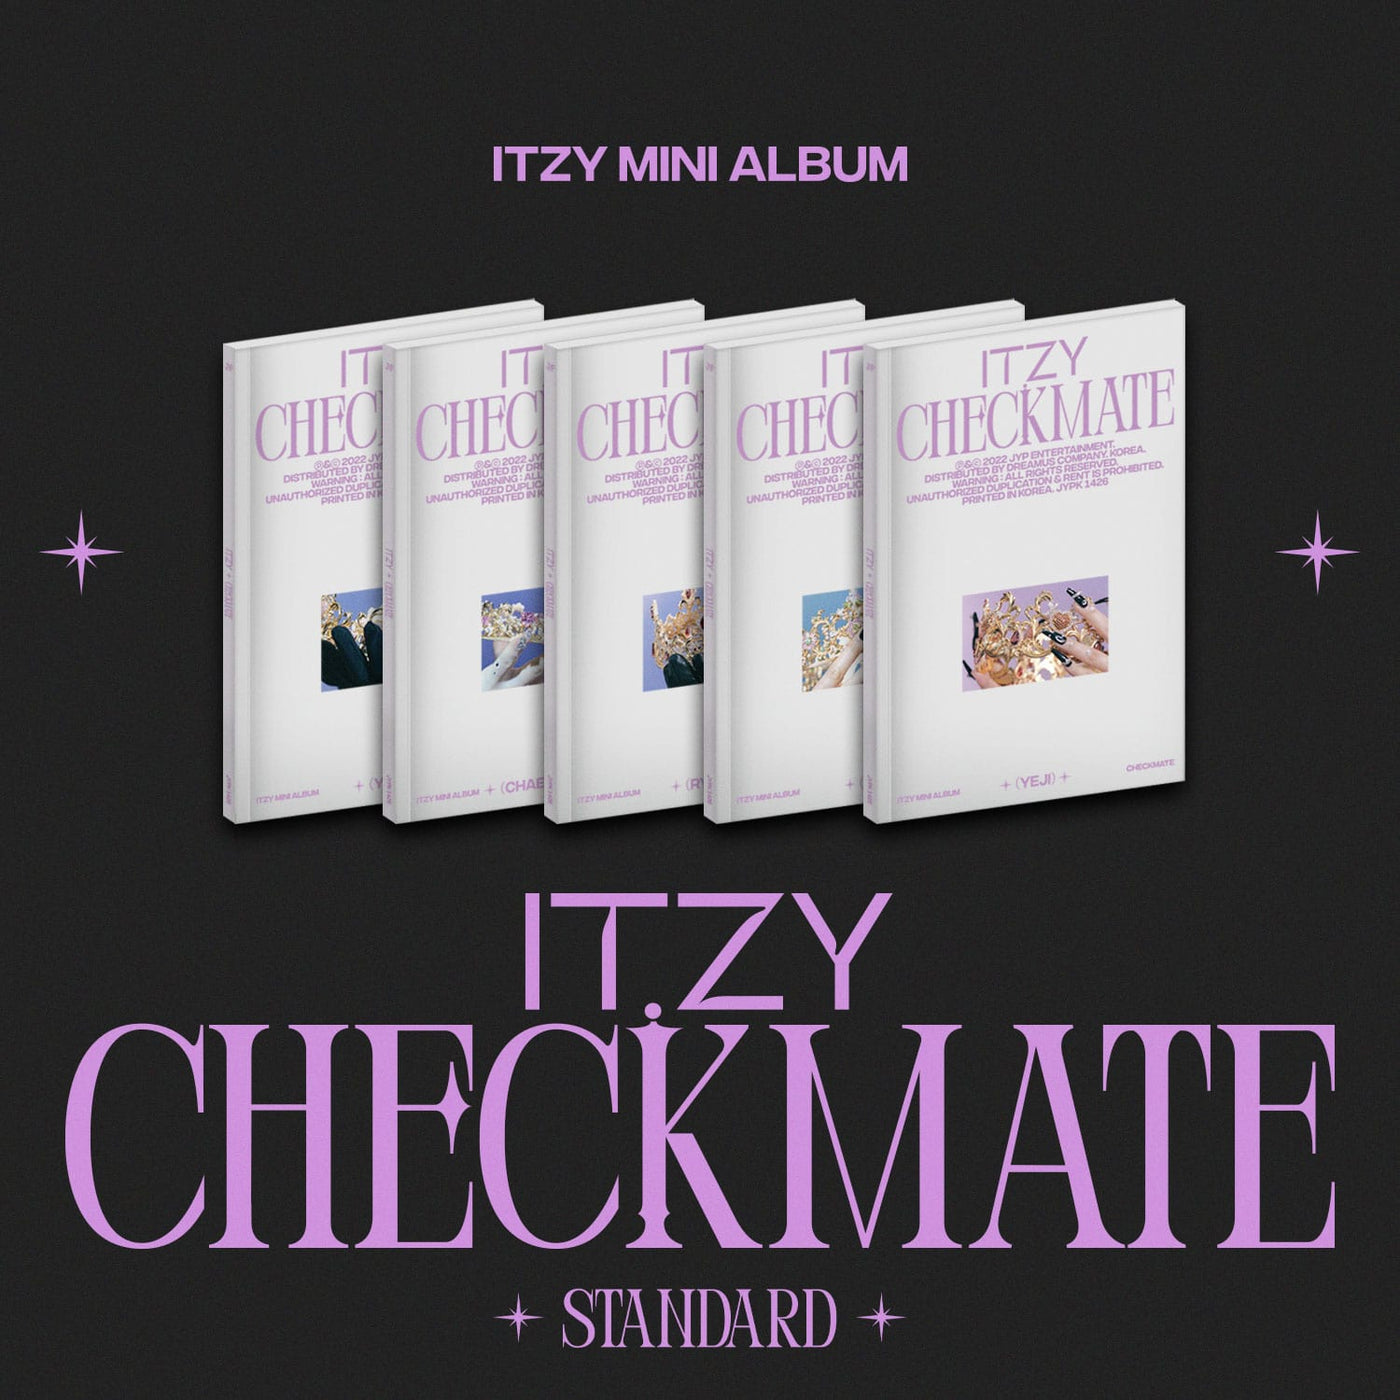 ITZY CHECKMATE (STANDARD EDITION) 🇰🇷